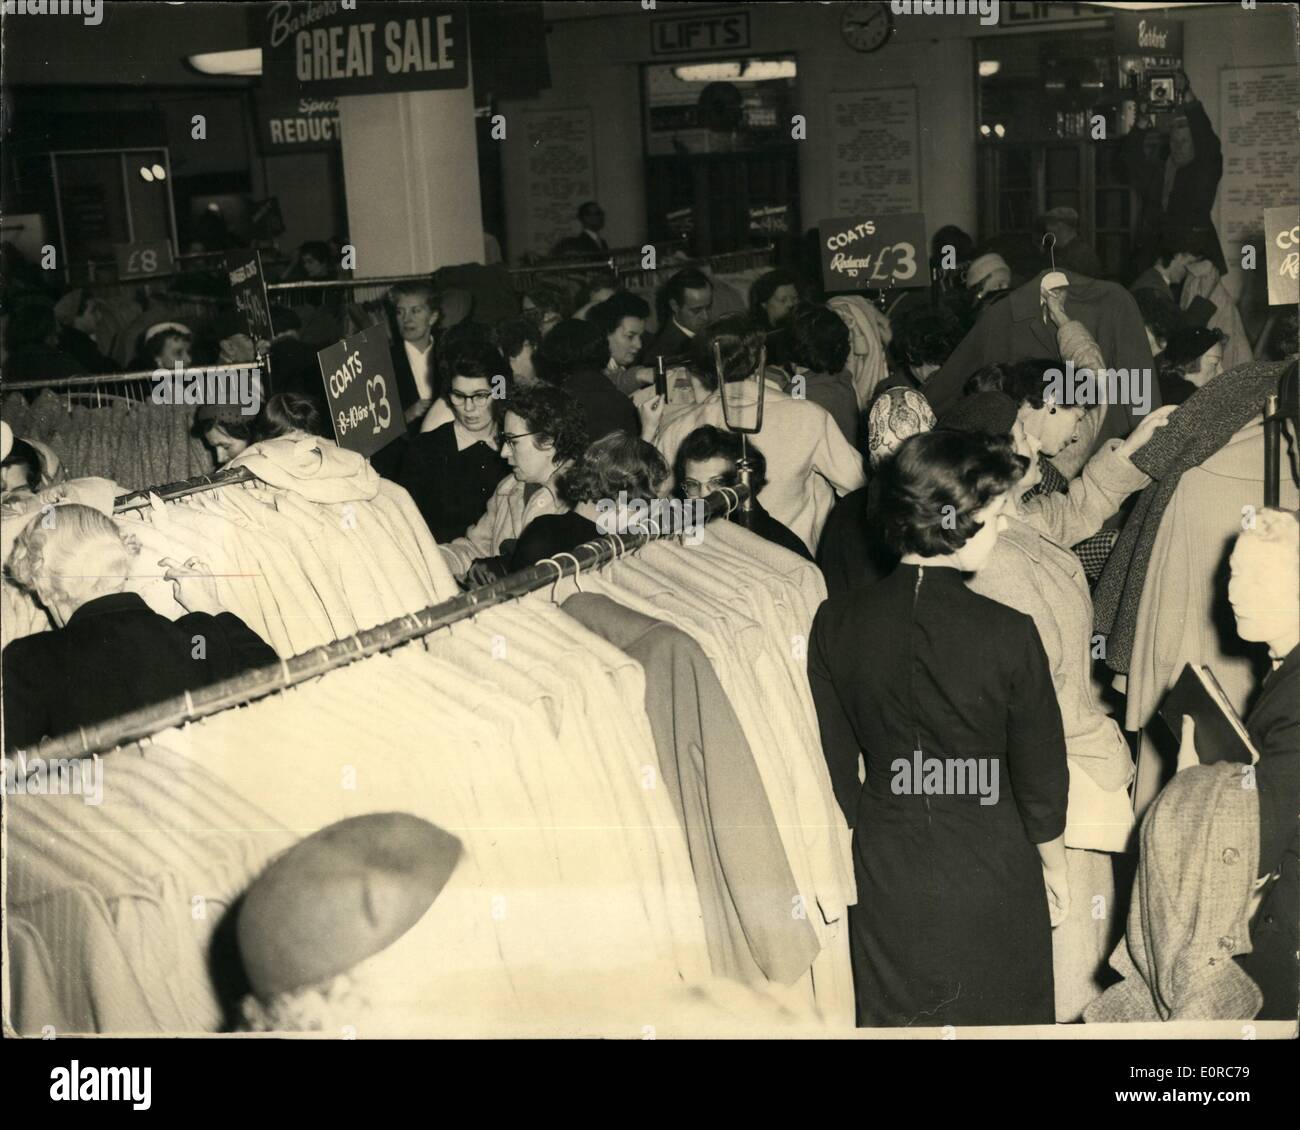 Dec. 12, 1958 - Sale at Barker's: Photo shows the scene at Barker's of Kensington this morning, as women hunt for bargain among Stock Photo